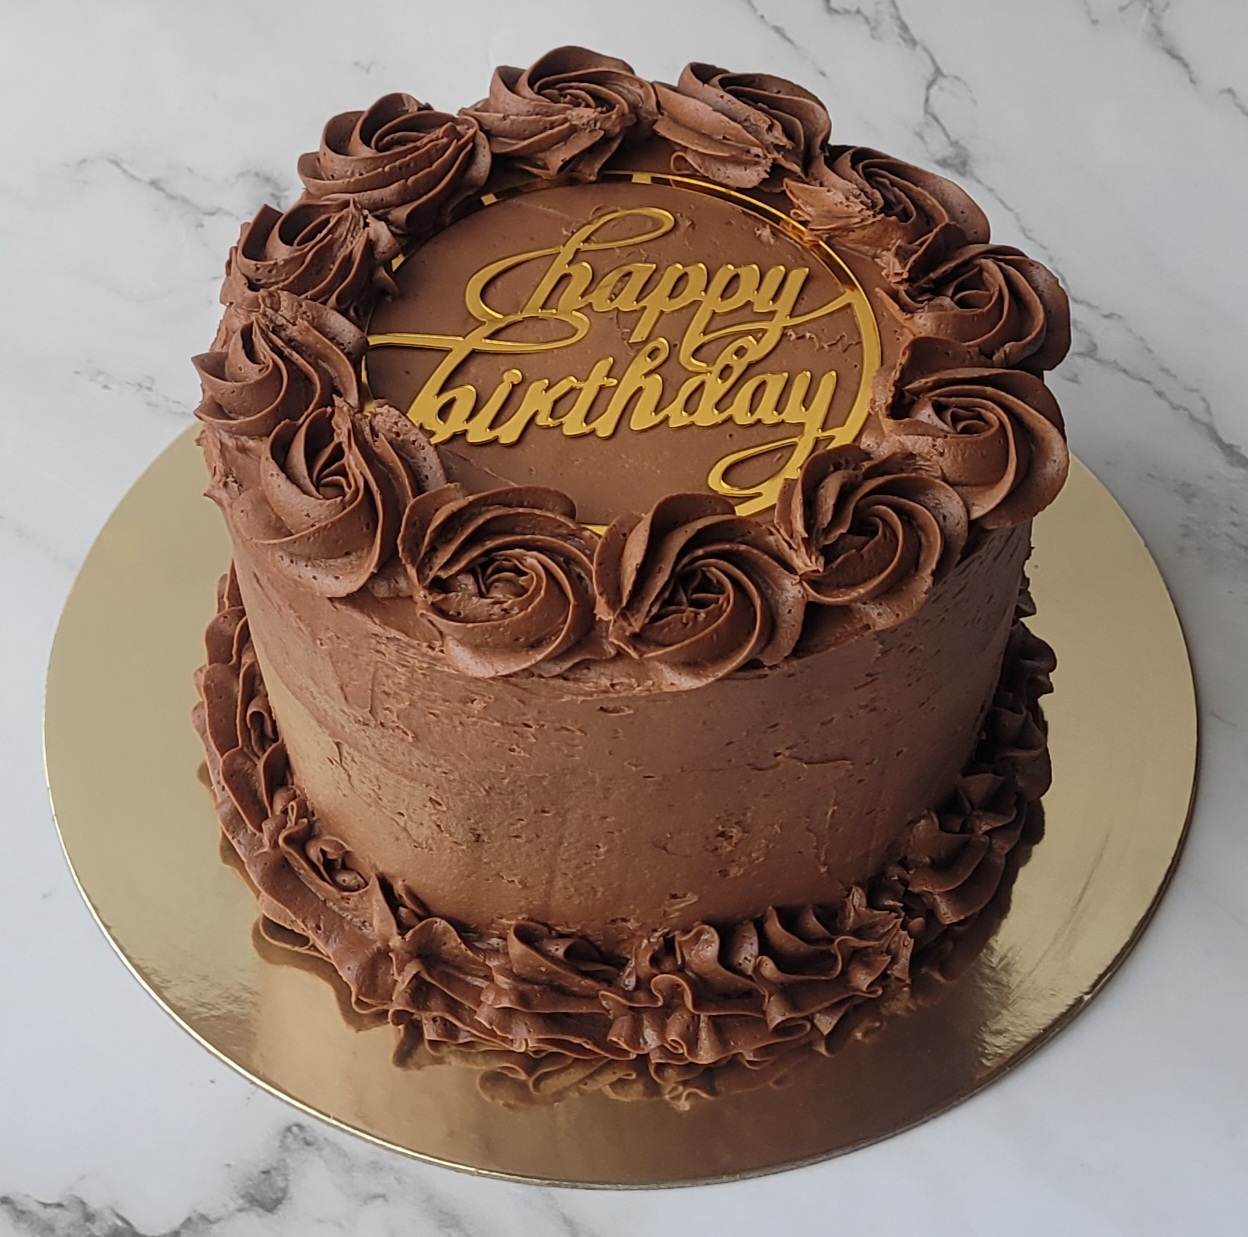 Decadent chocolate birthday cake topped with decorative chocolate buttercream icing.